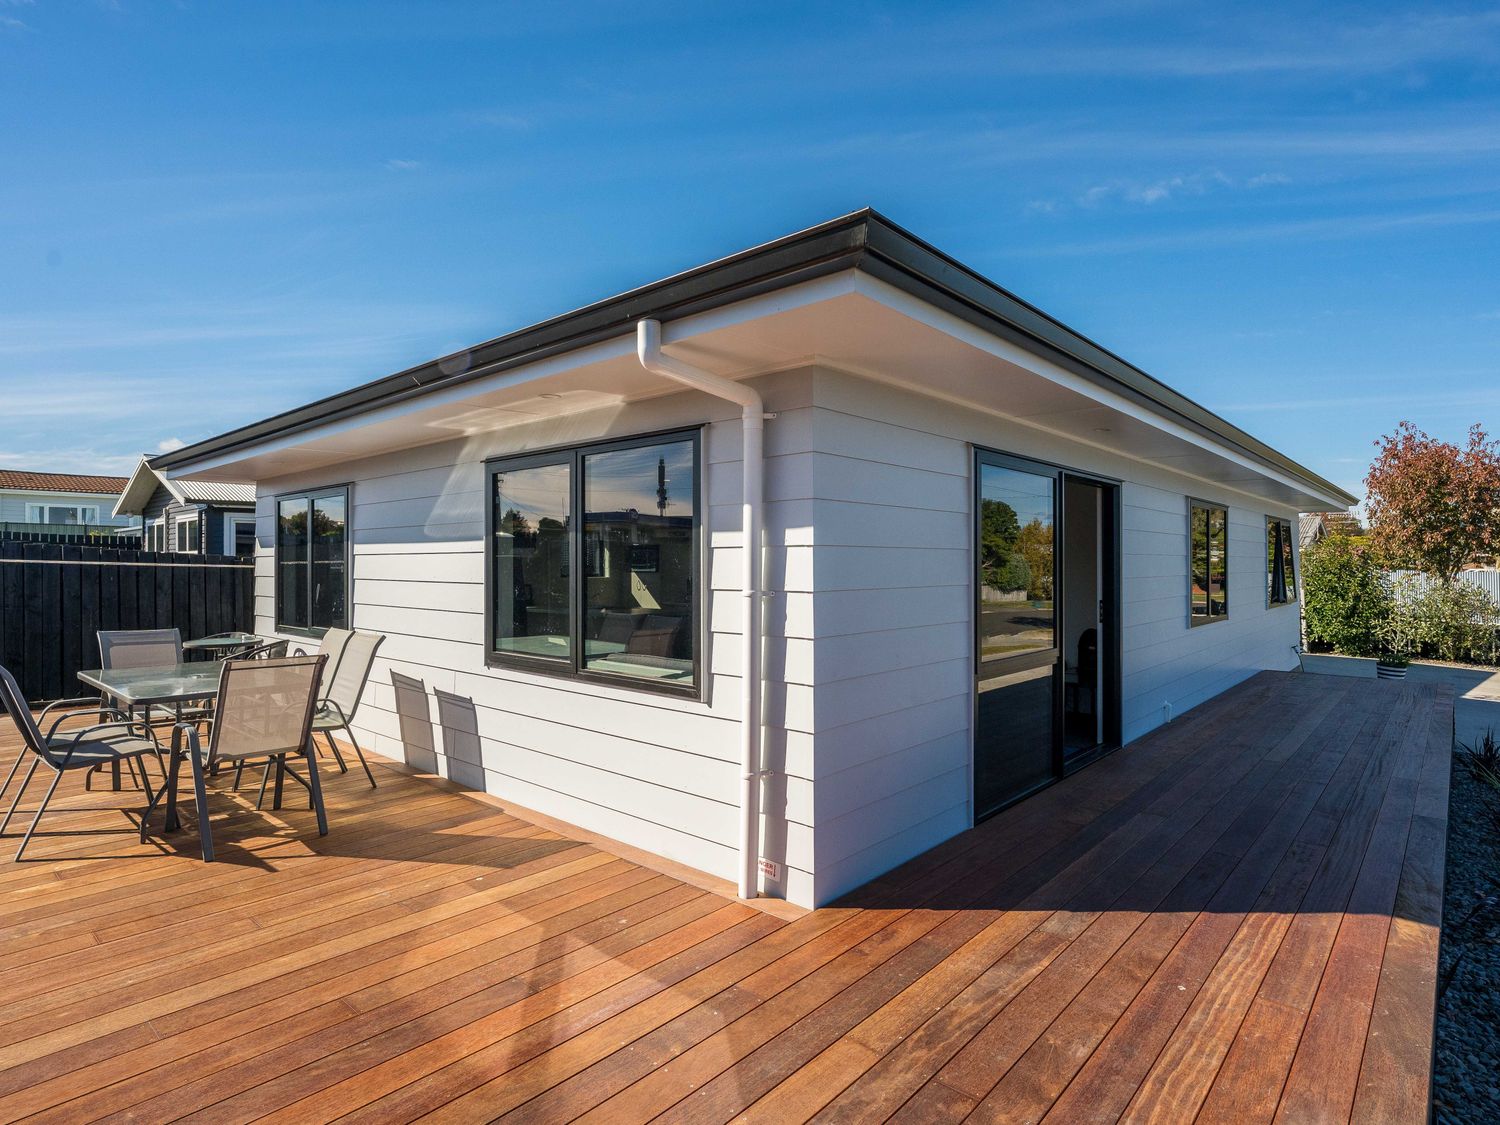 Middle Island Bach - Taupo Holiday Home -  - 1156782 - photo 1